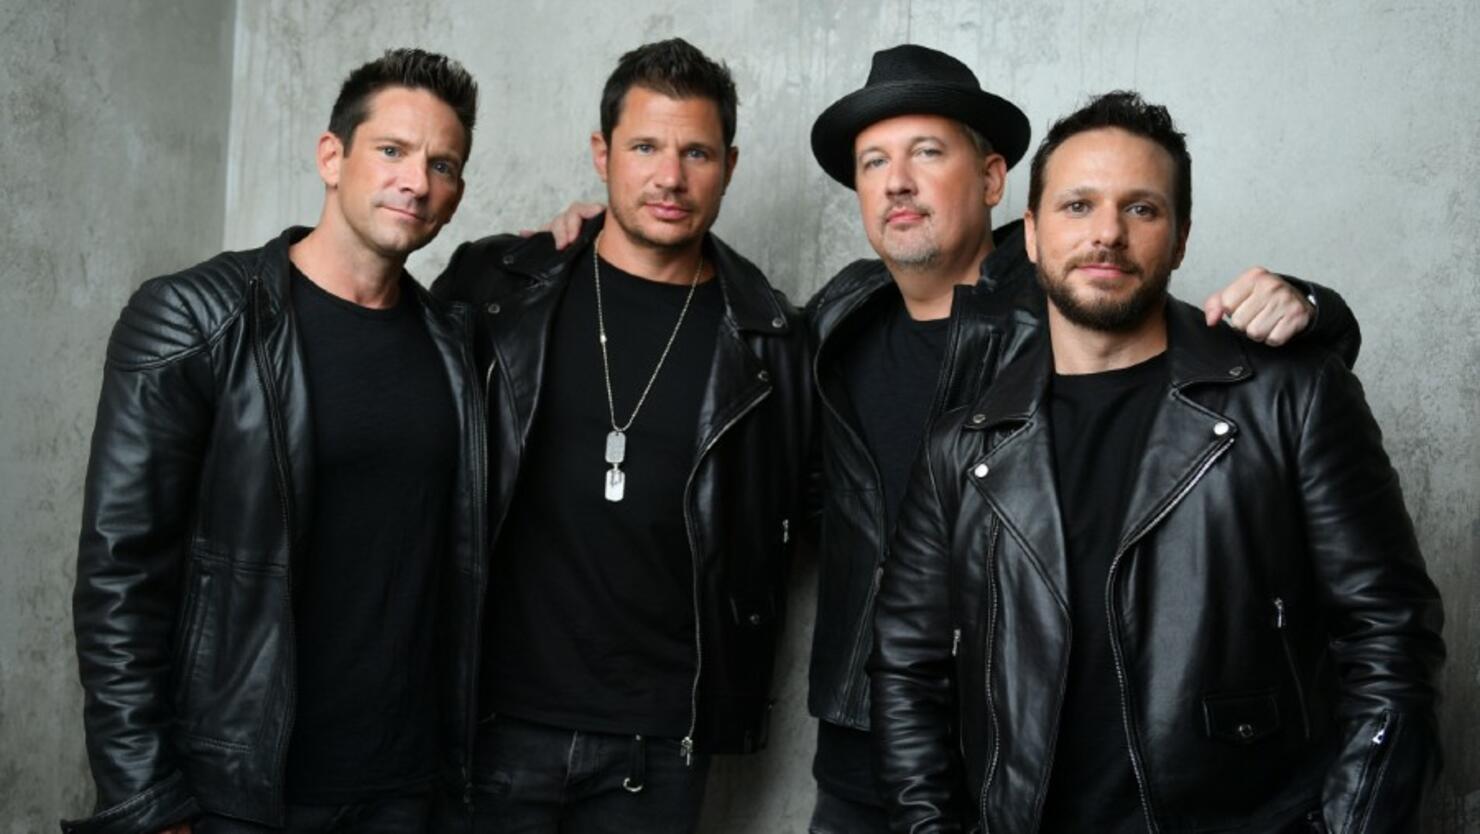 98 Degrees Reunites — and the Guys Look Hotter Than Ever! - Life & Style